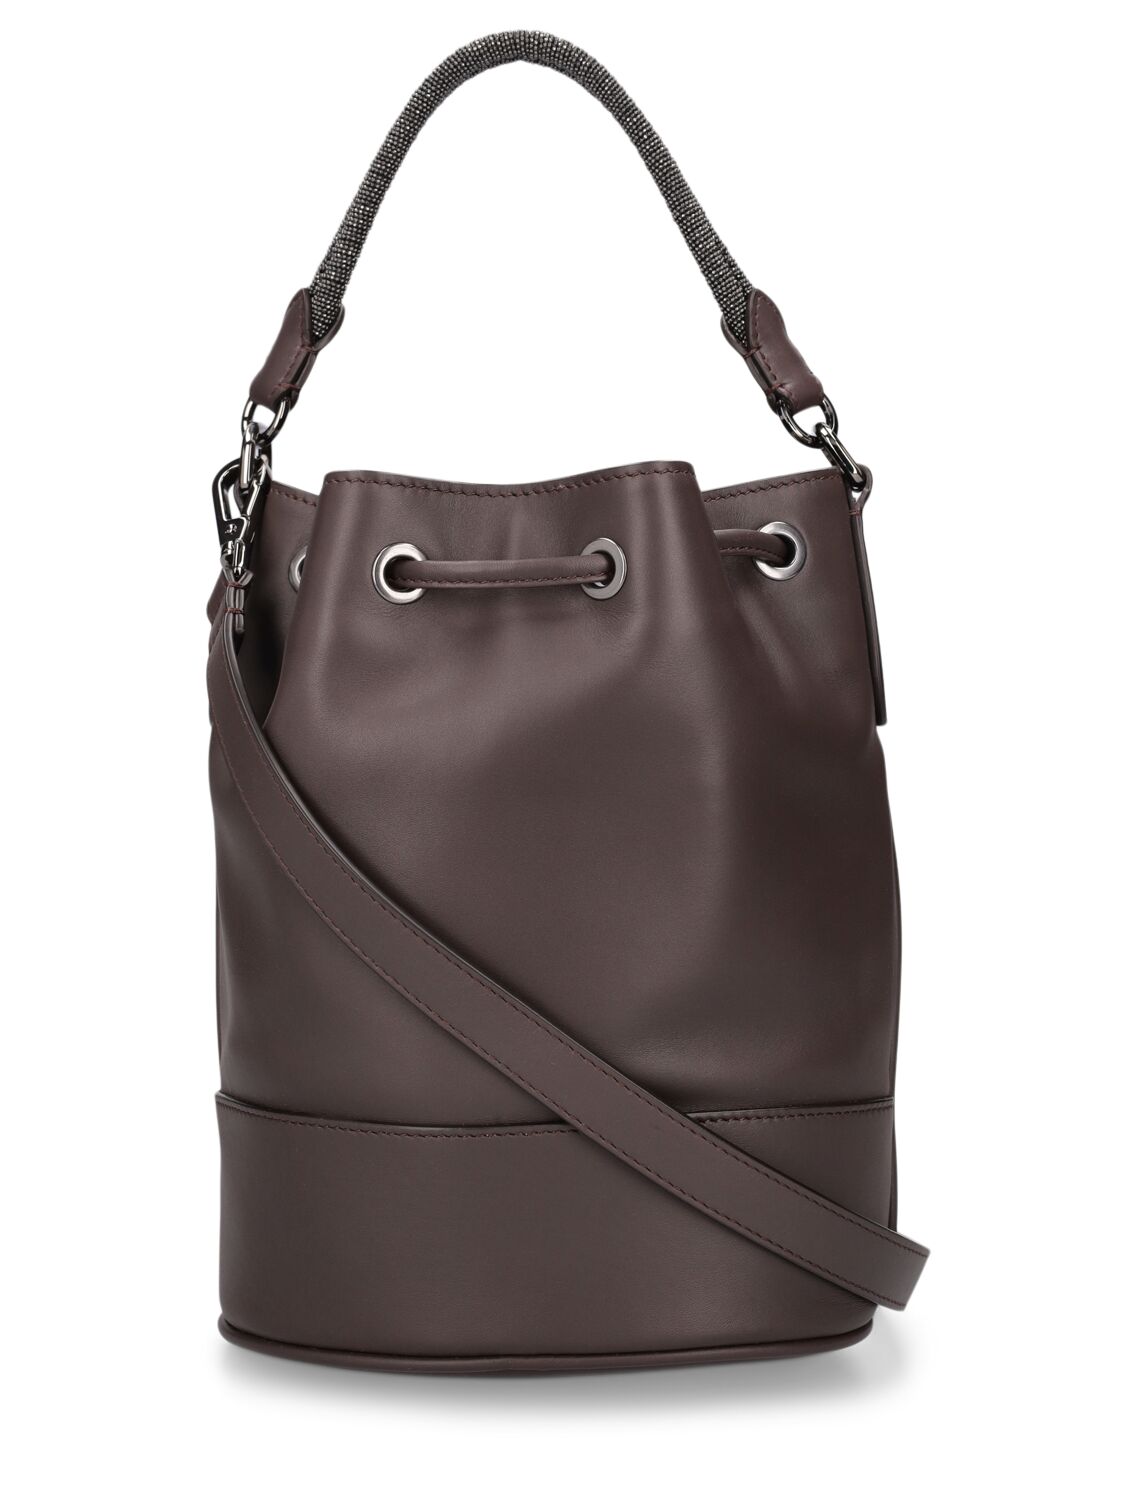 Shop Brunello Cucinelli Softy Leather Bucket Bag In Towny